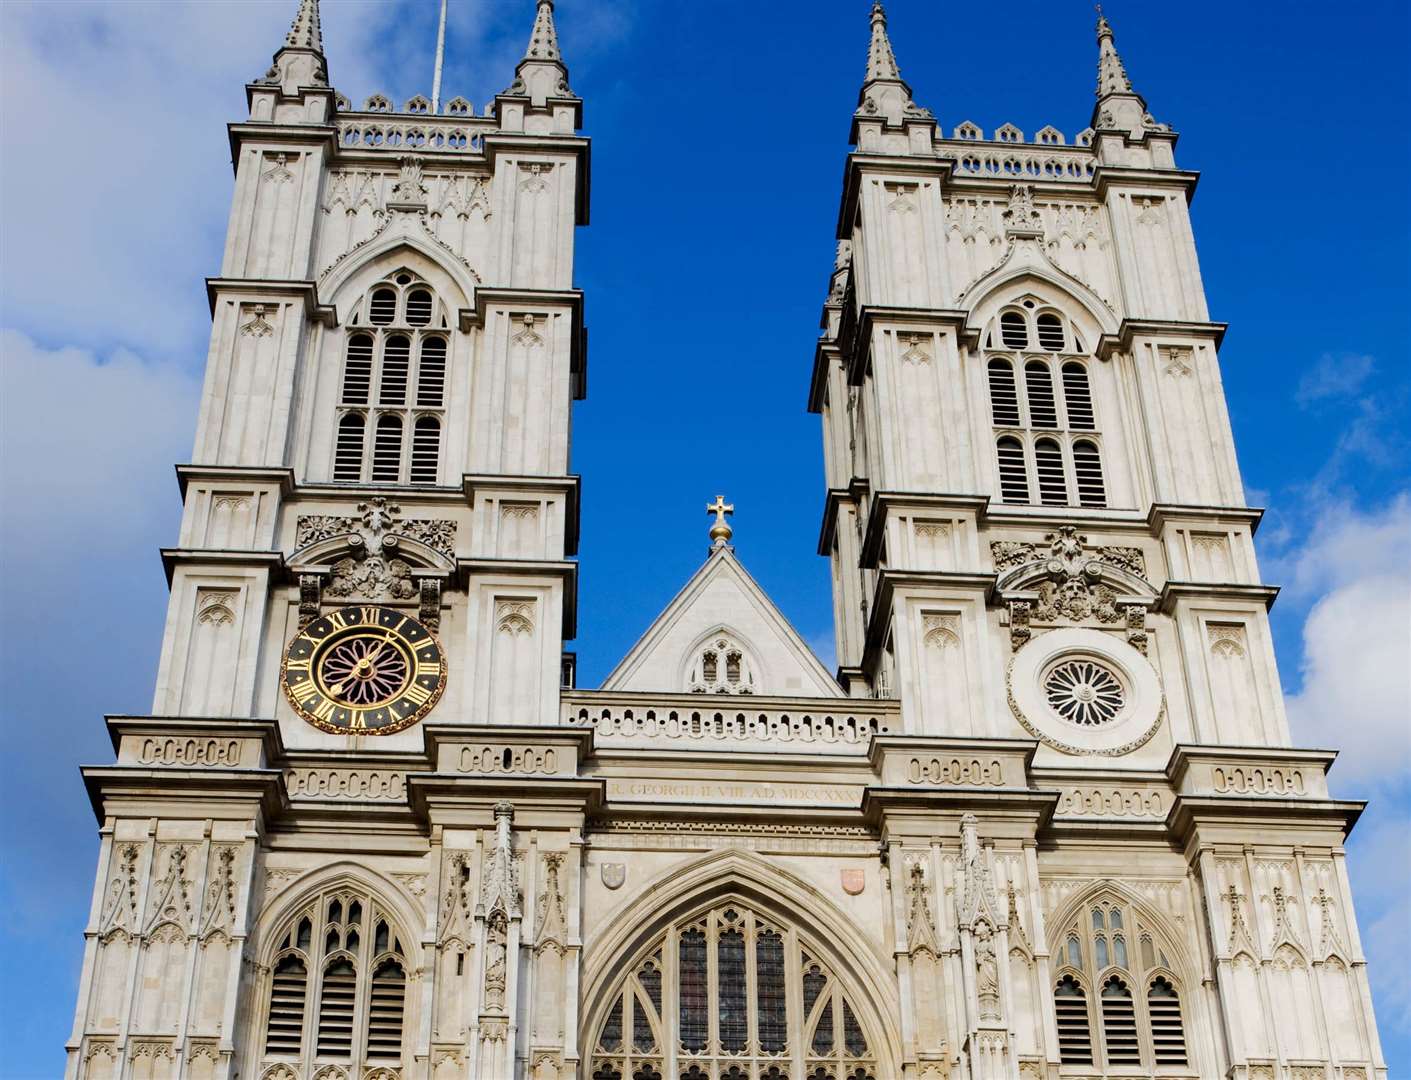 Charles Dickens is buried in Westminster Abbey - but he wanted something very different